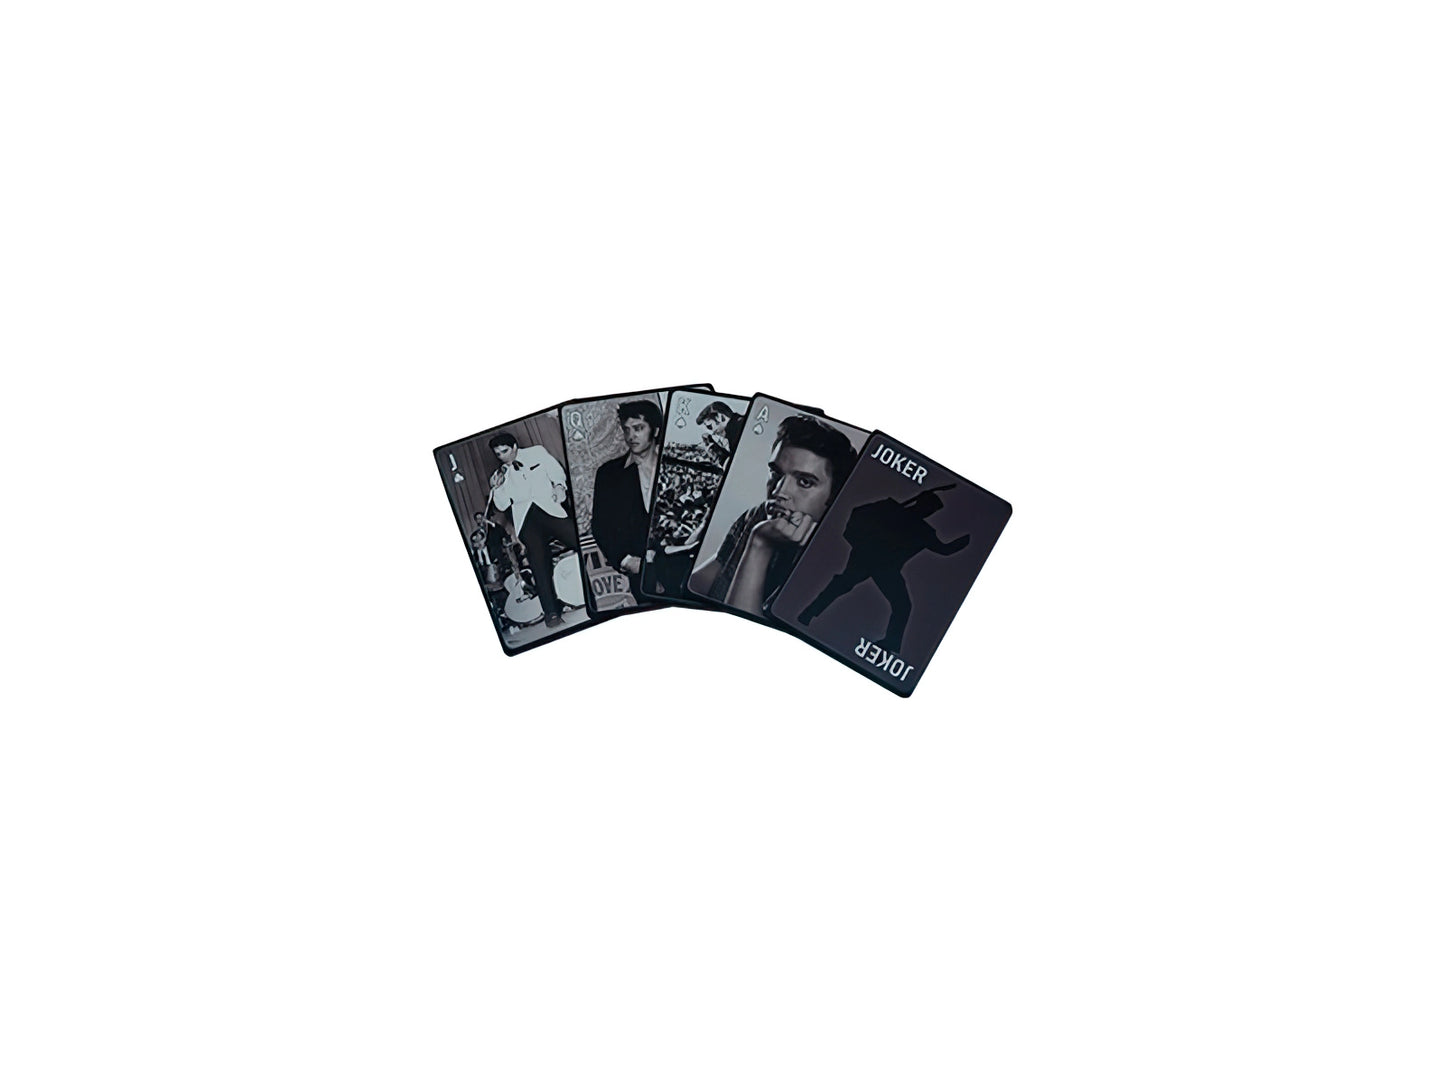 Elvis Presley Black and White Playing Cards by Aquarius - A Tribue to the King